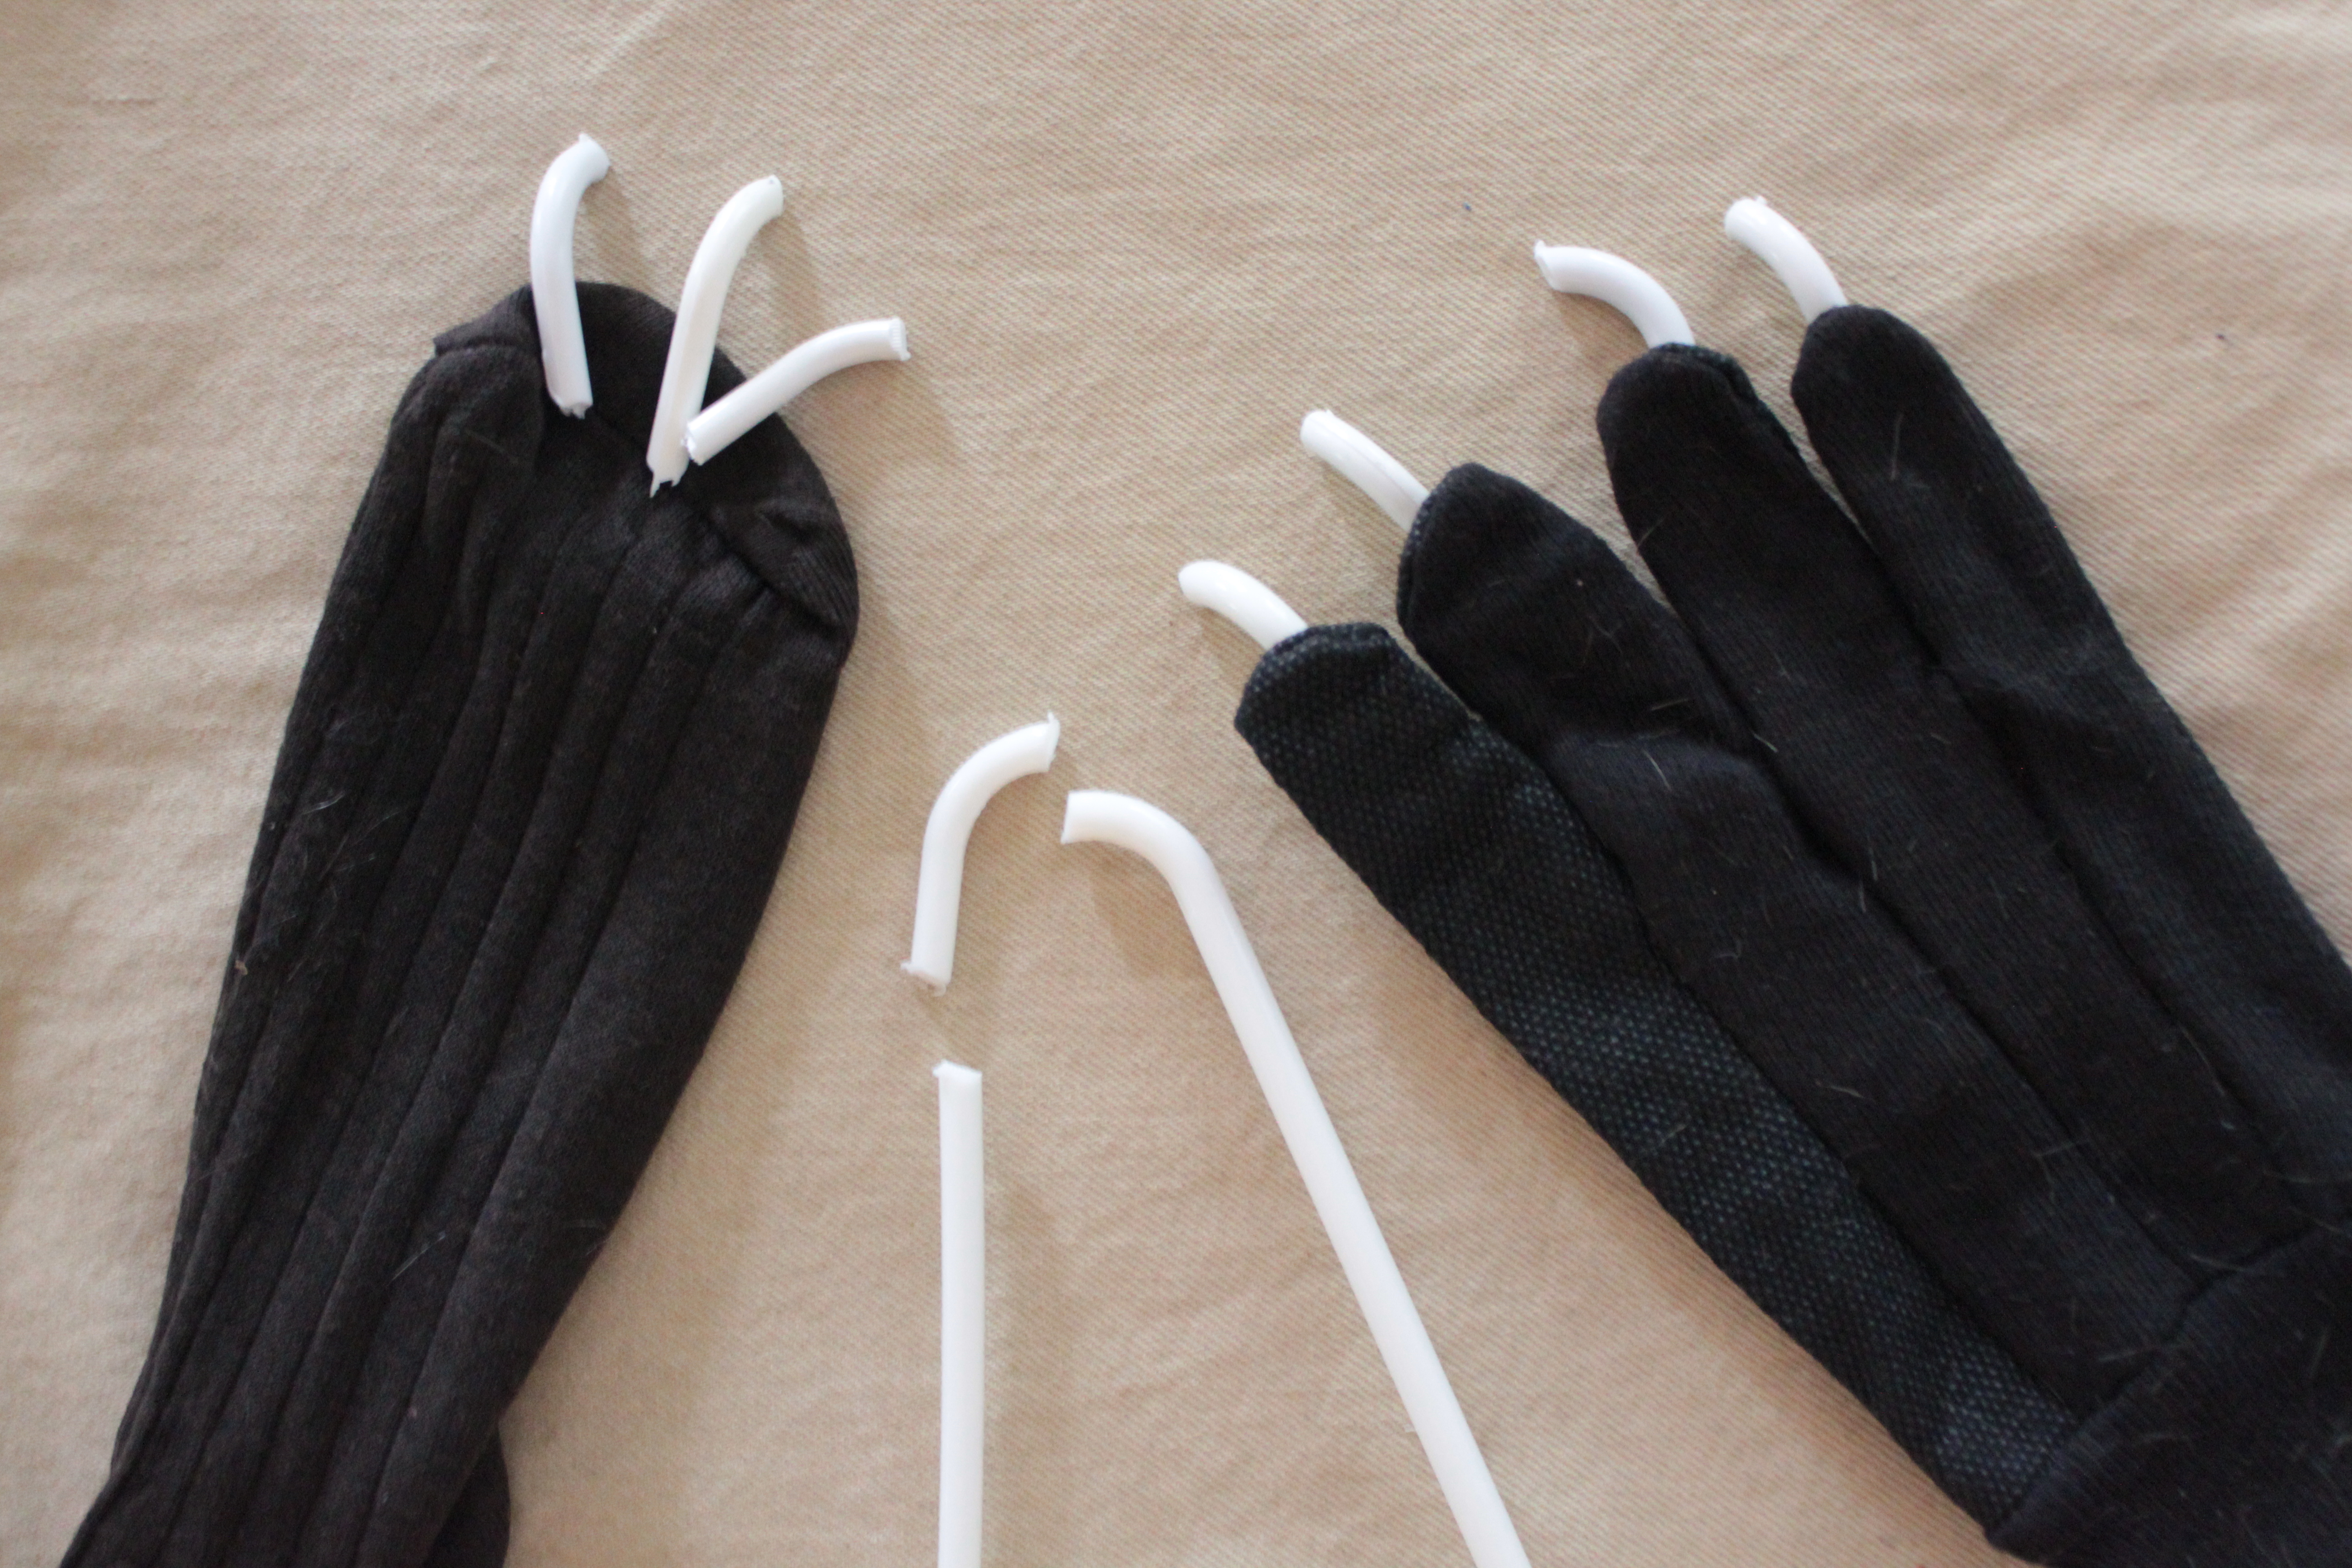 Insert plastic “claws” into the slits and hold in place with craft glue. Cut a piece of fur the size of each glove and sock; glue in place.